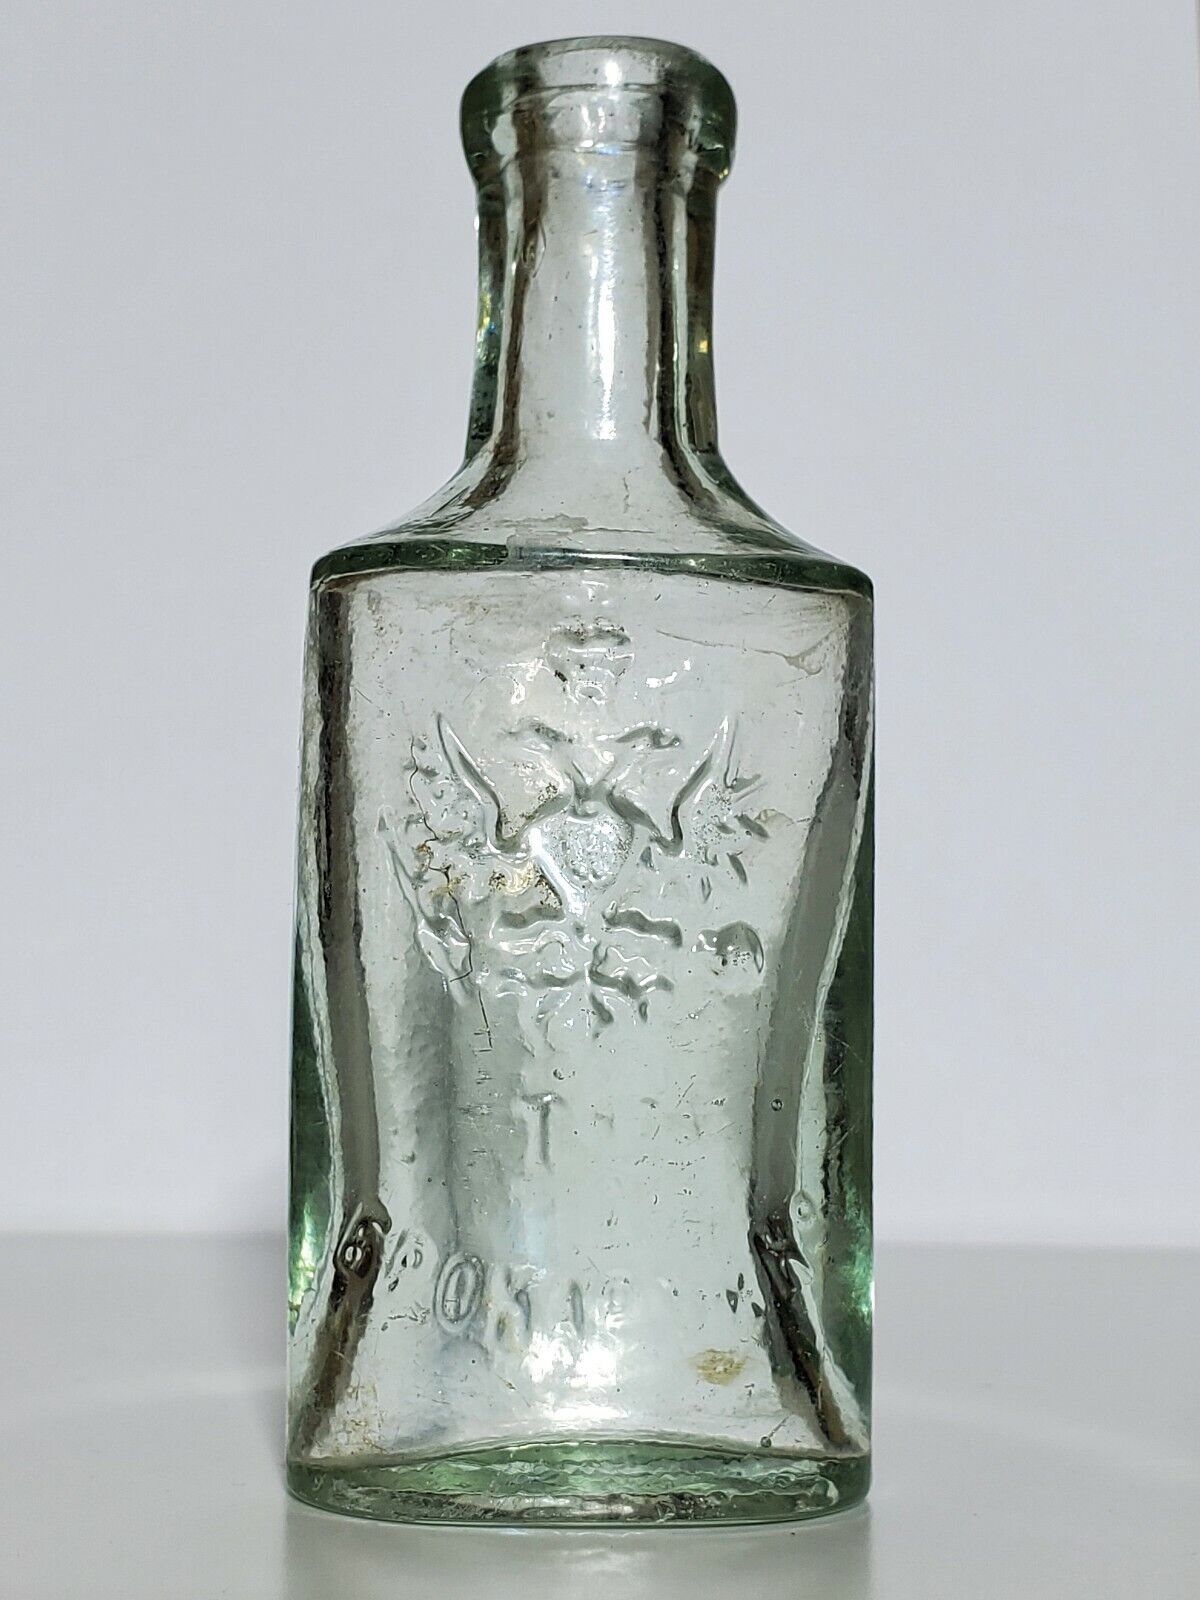 Antique perfume bottle of the Russian Empire\